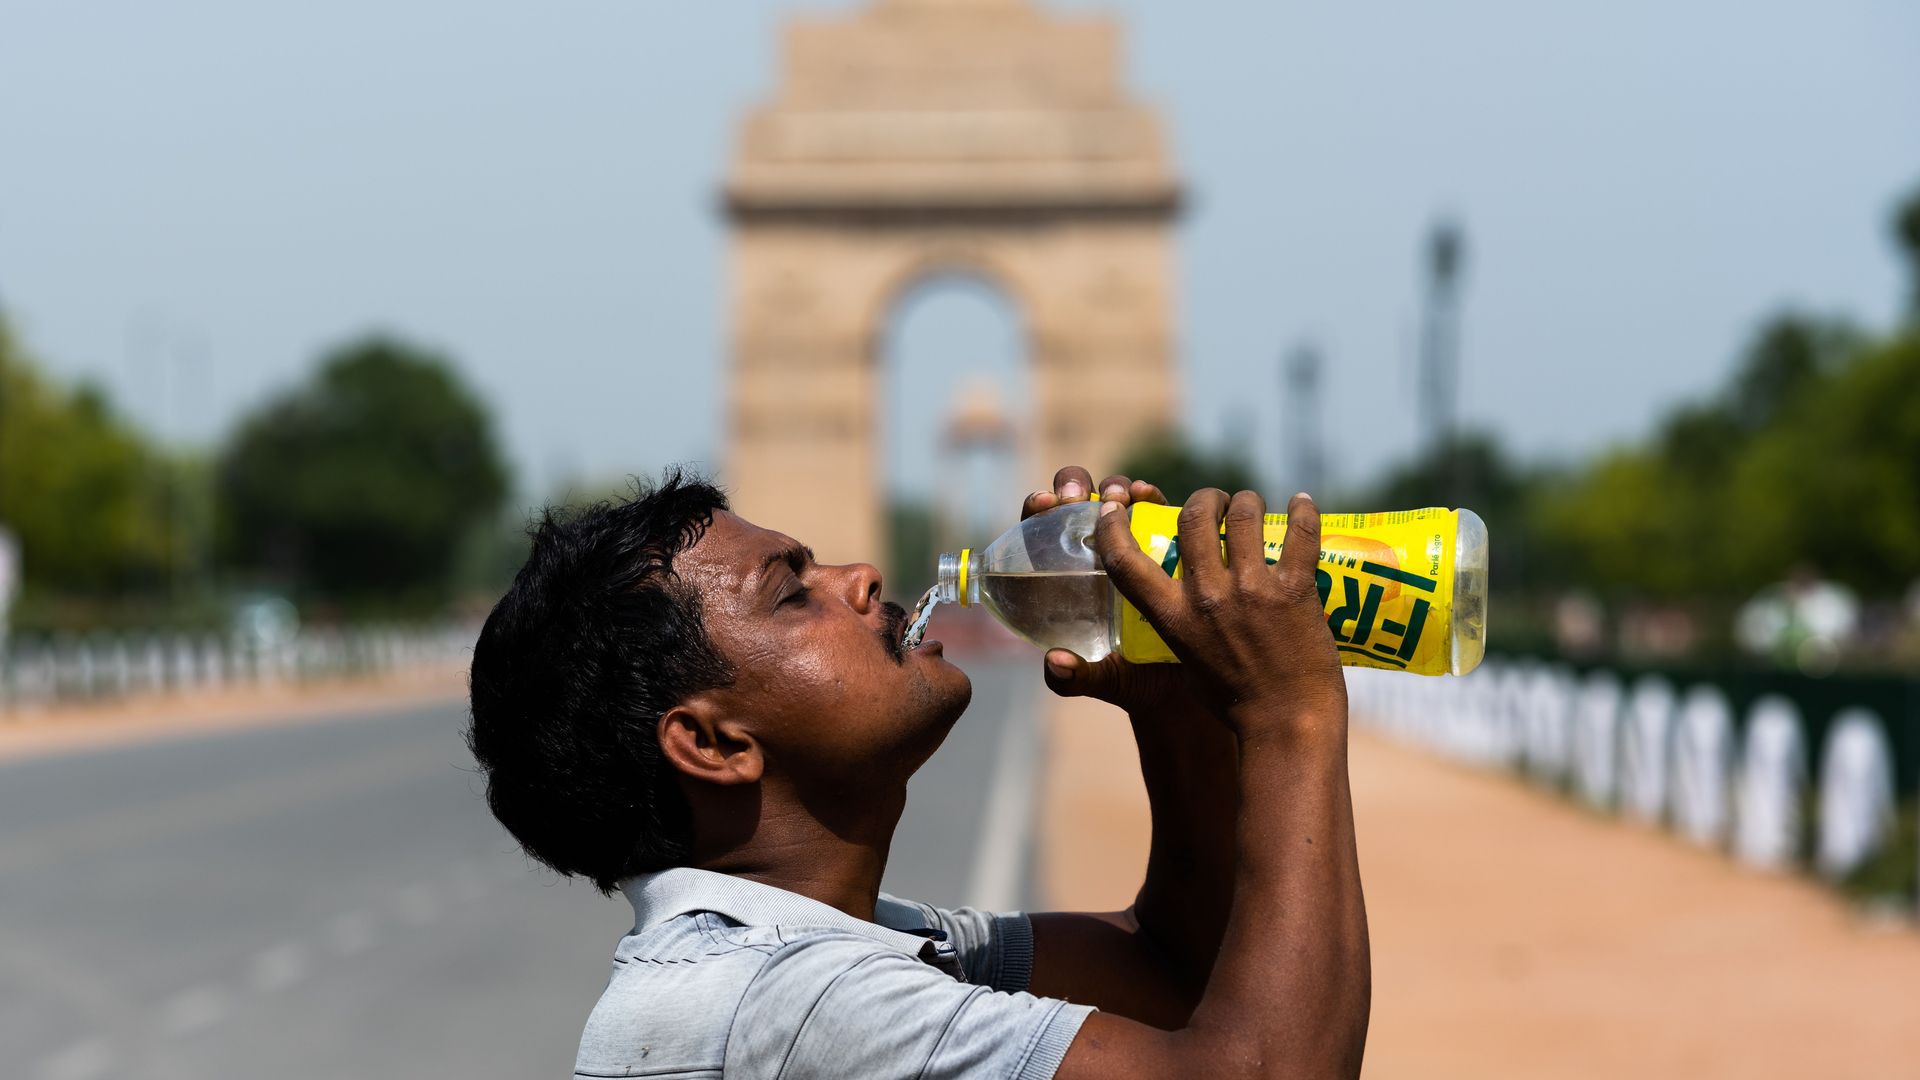 Man drinking water in front of a statue on a hot day.